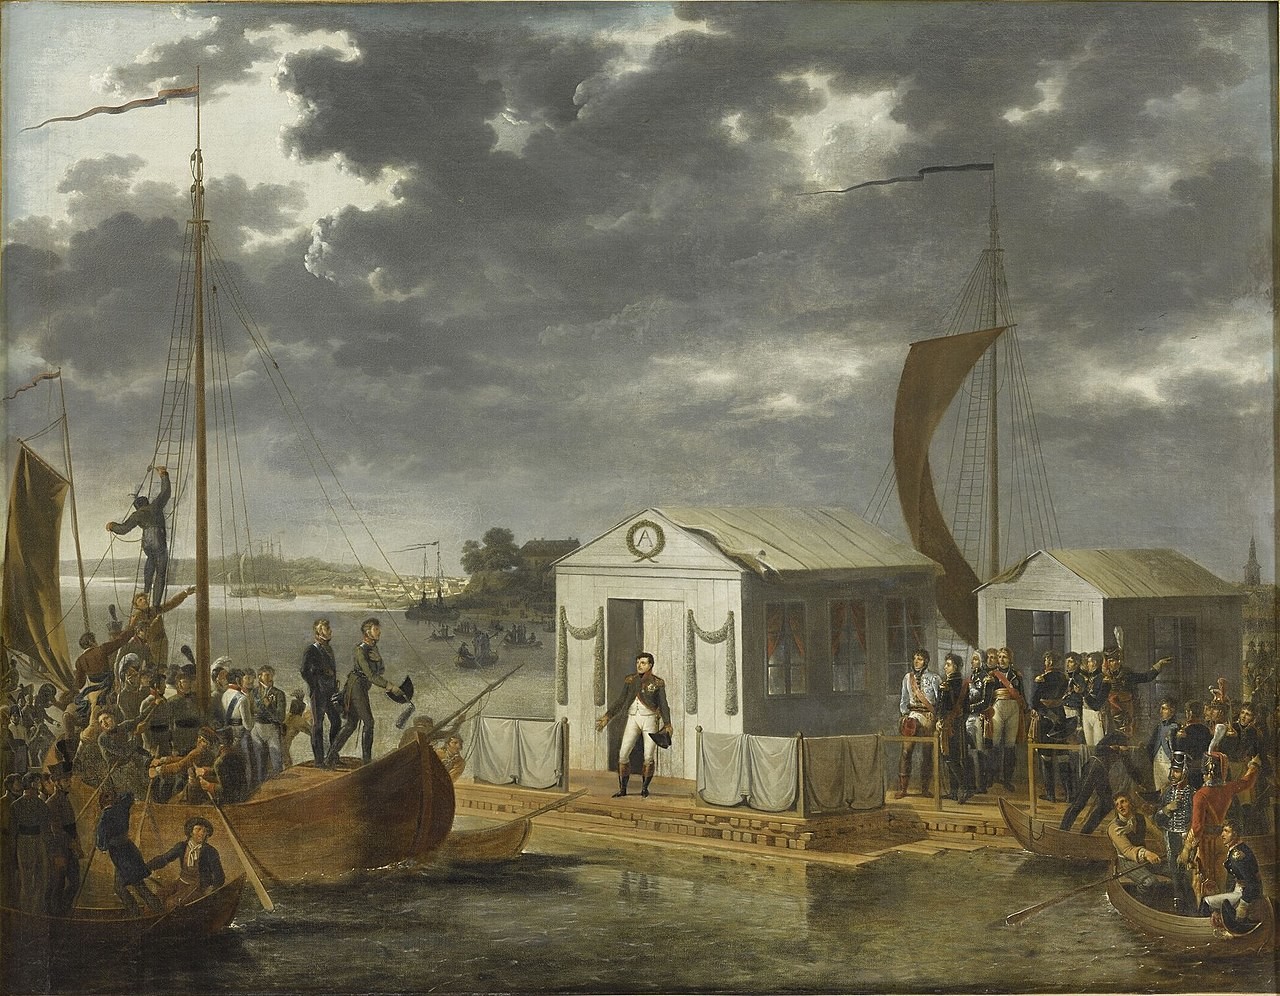 The meeting of Napoleon I and Alexander I on the Neman river, June 25th, 1807 (Treaty of Tilsit), by Adolph Roehn 